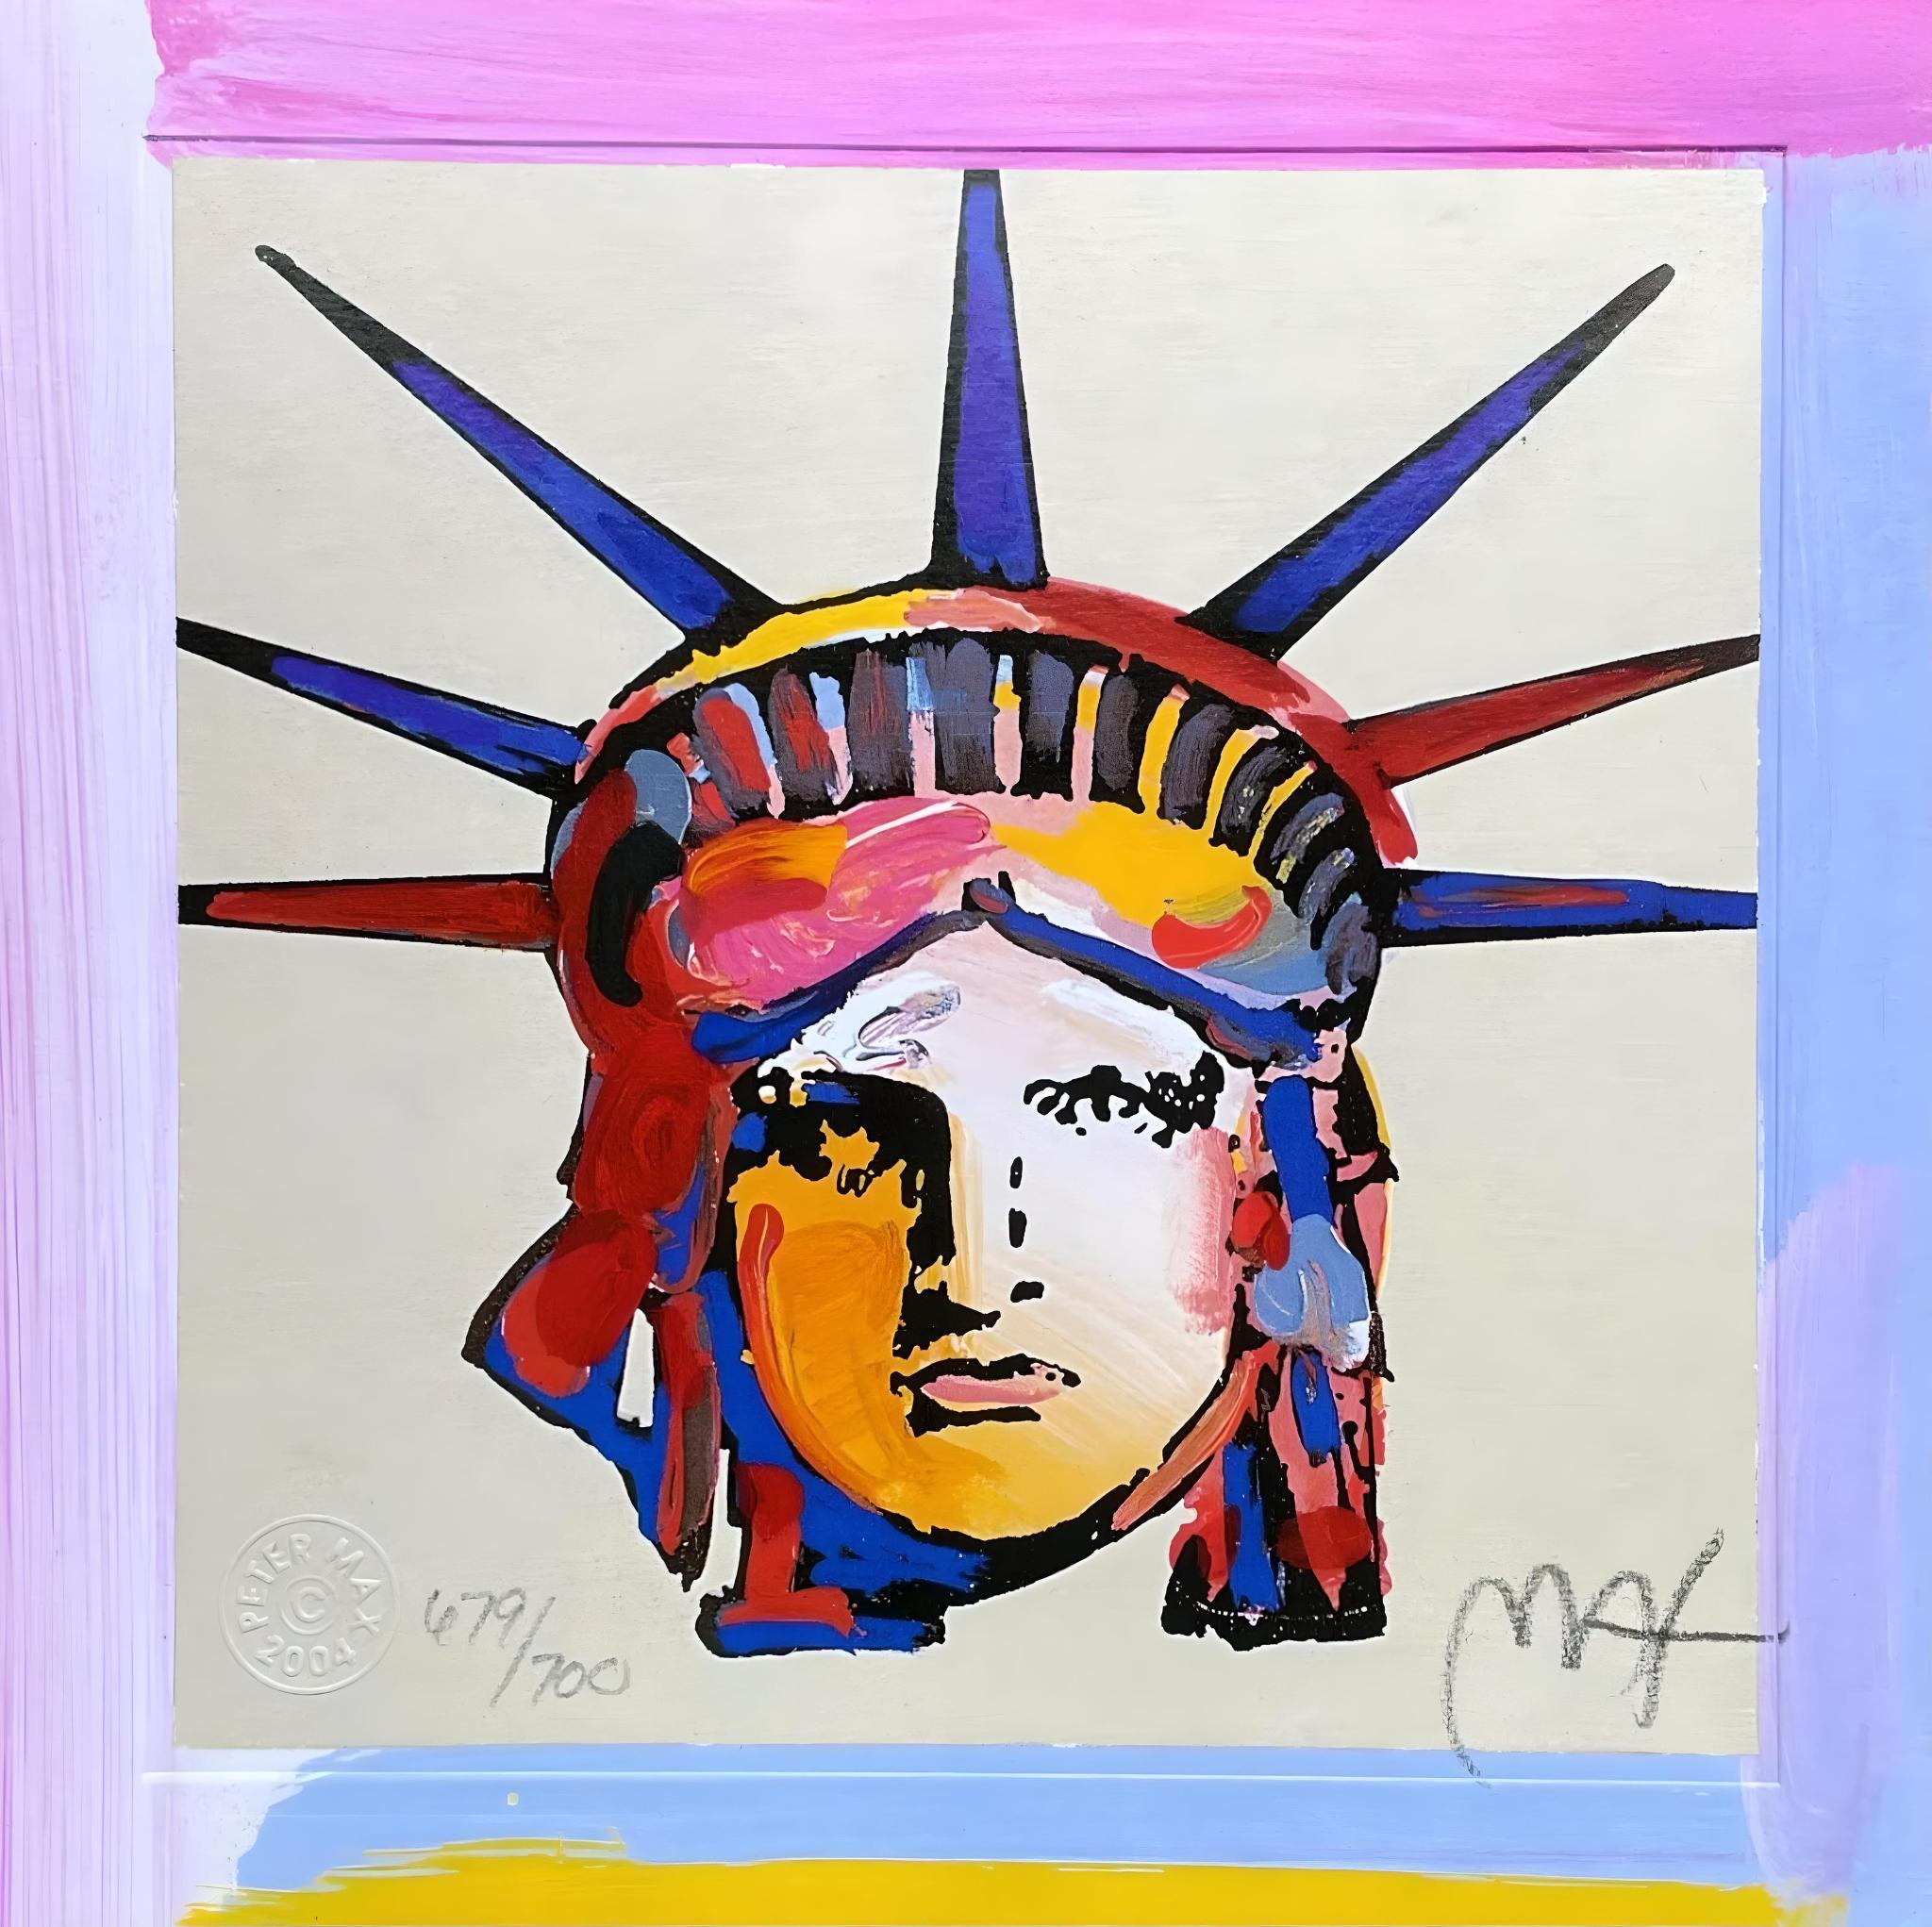 Artist: Peter Max (1937)
Title: Liberty Head X
Year: 2004
Edition: 679/700, plus proofs
Medium: Lithograph on Lustro Saxony paper
Size: 7 x 6.87 inches
Condition: Excellent
Inscription: Signed and numbered by the artist.
Notes: Published by Via